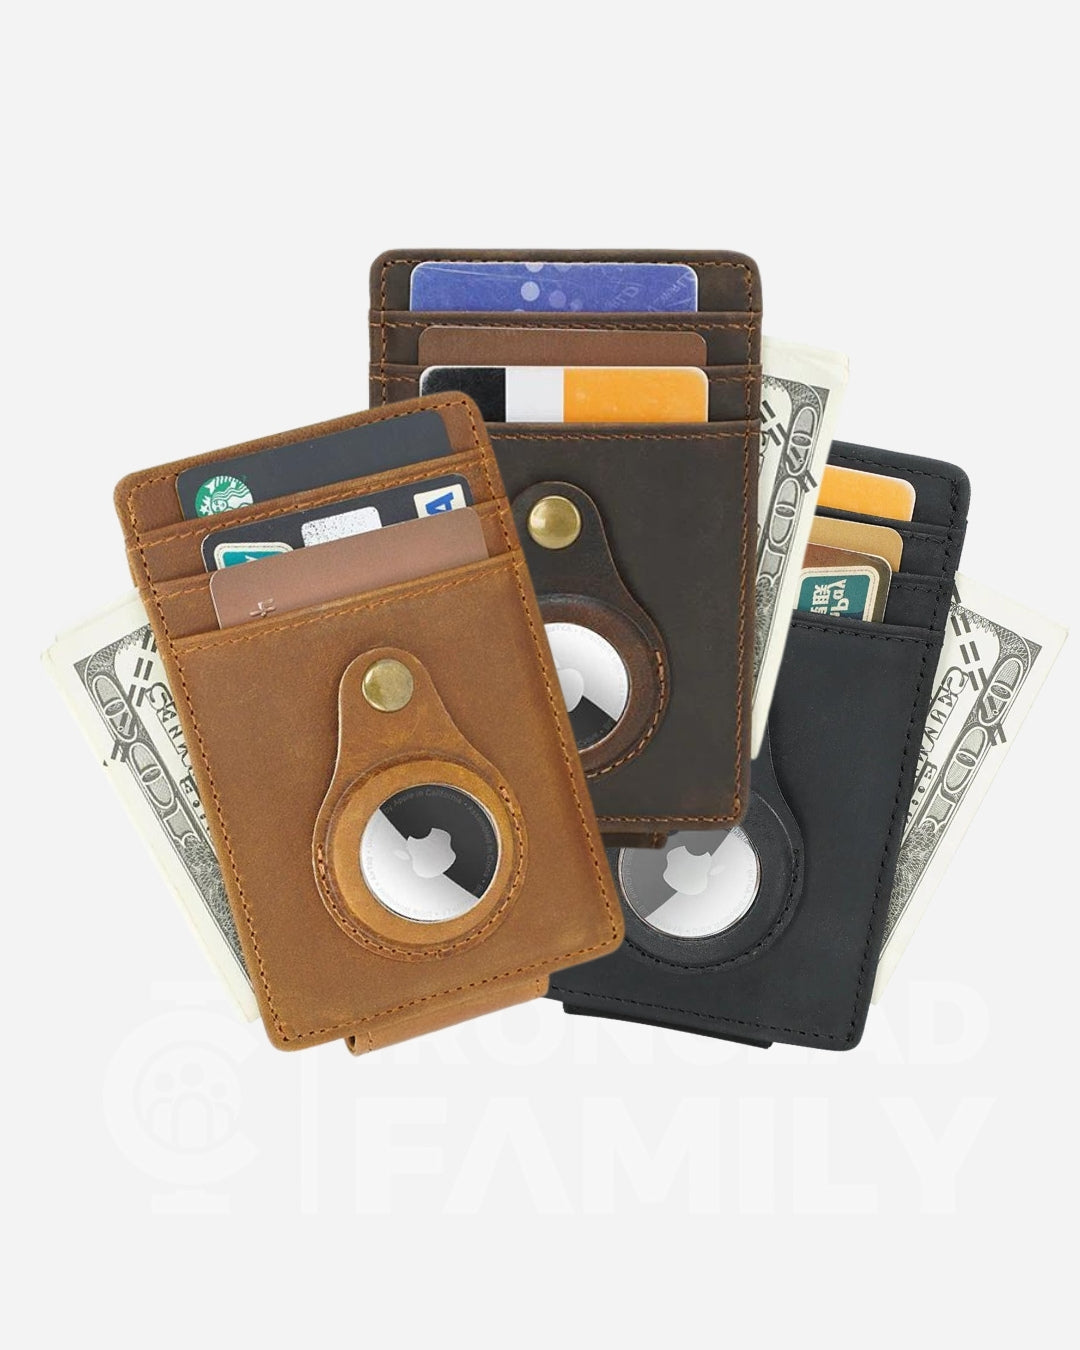 Three RFID blocking cowhide leather wallets with AirTag insert, money, and credit cards